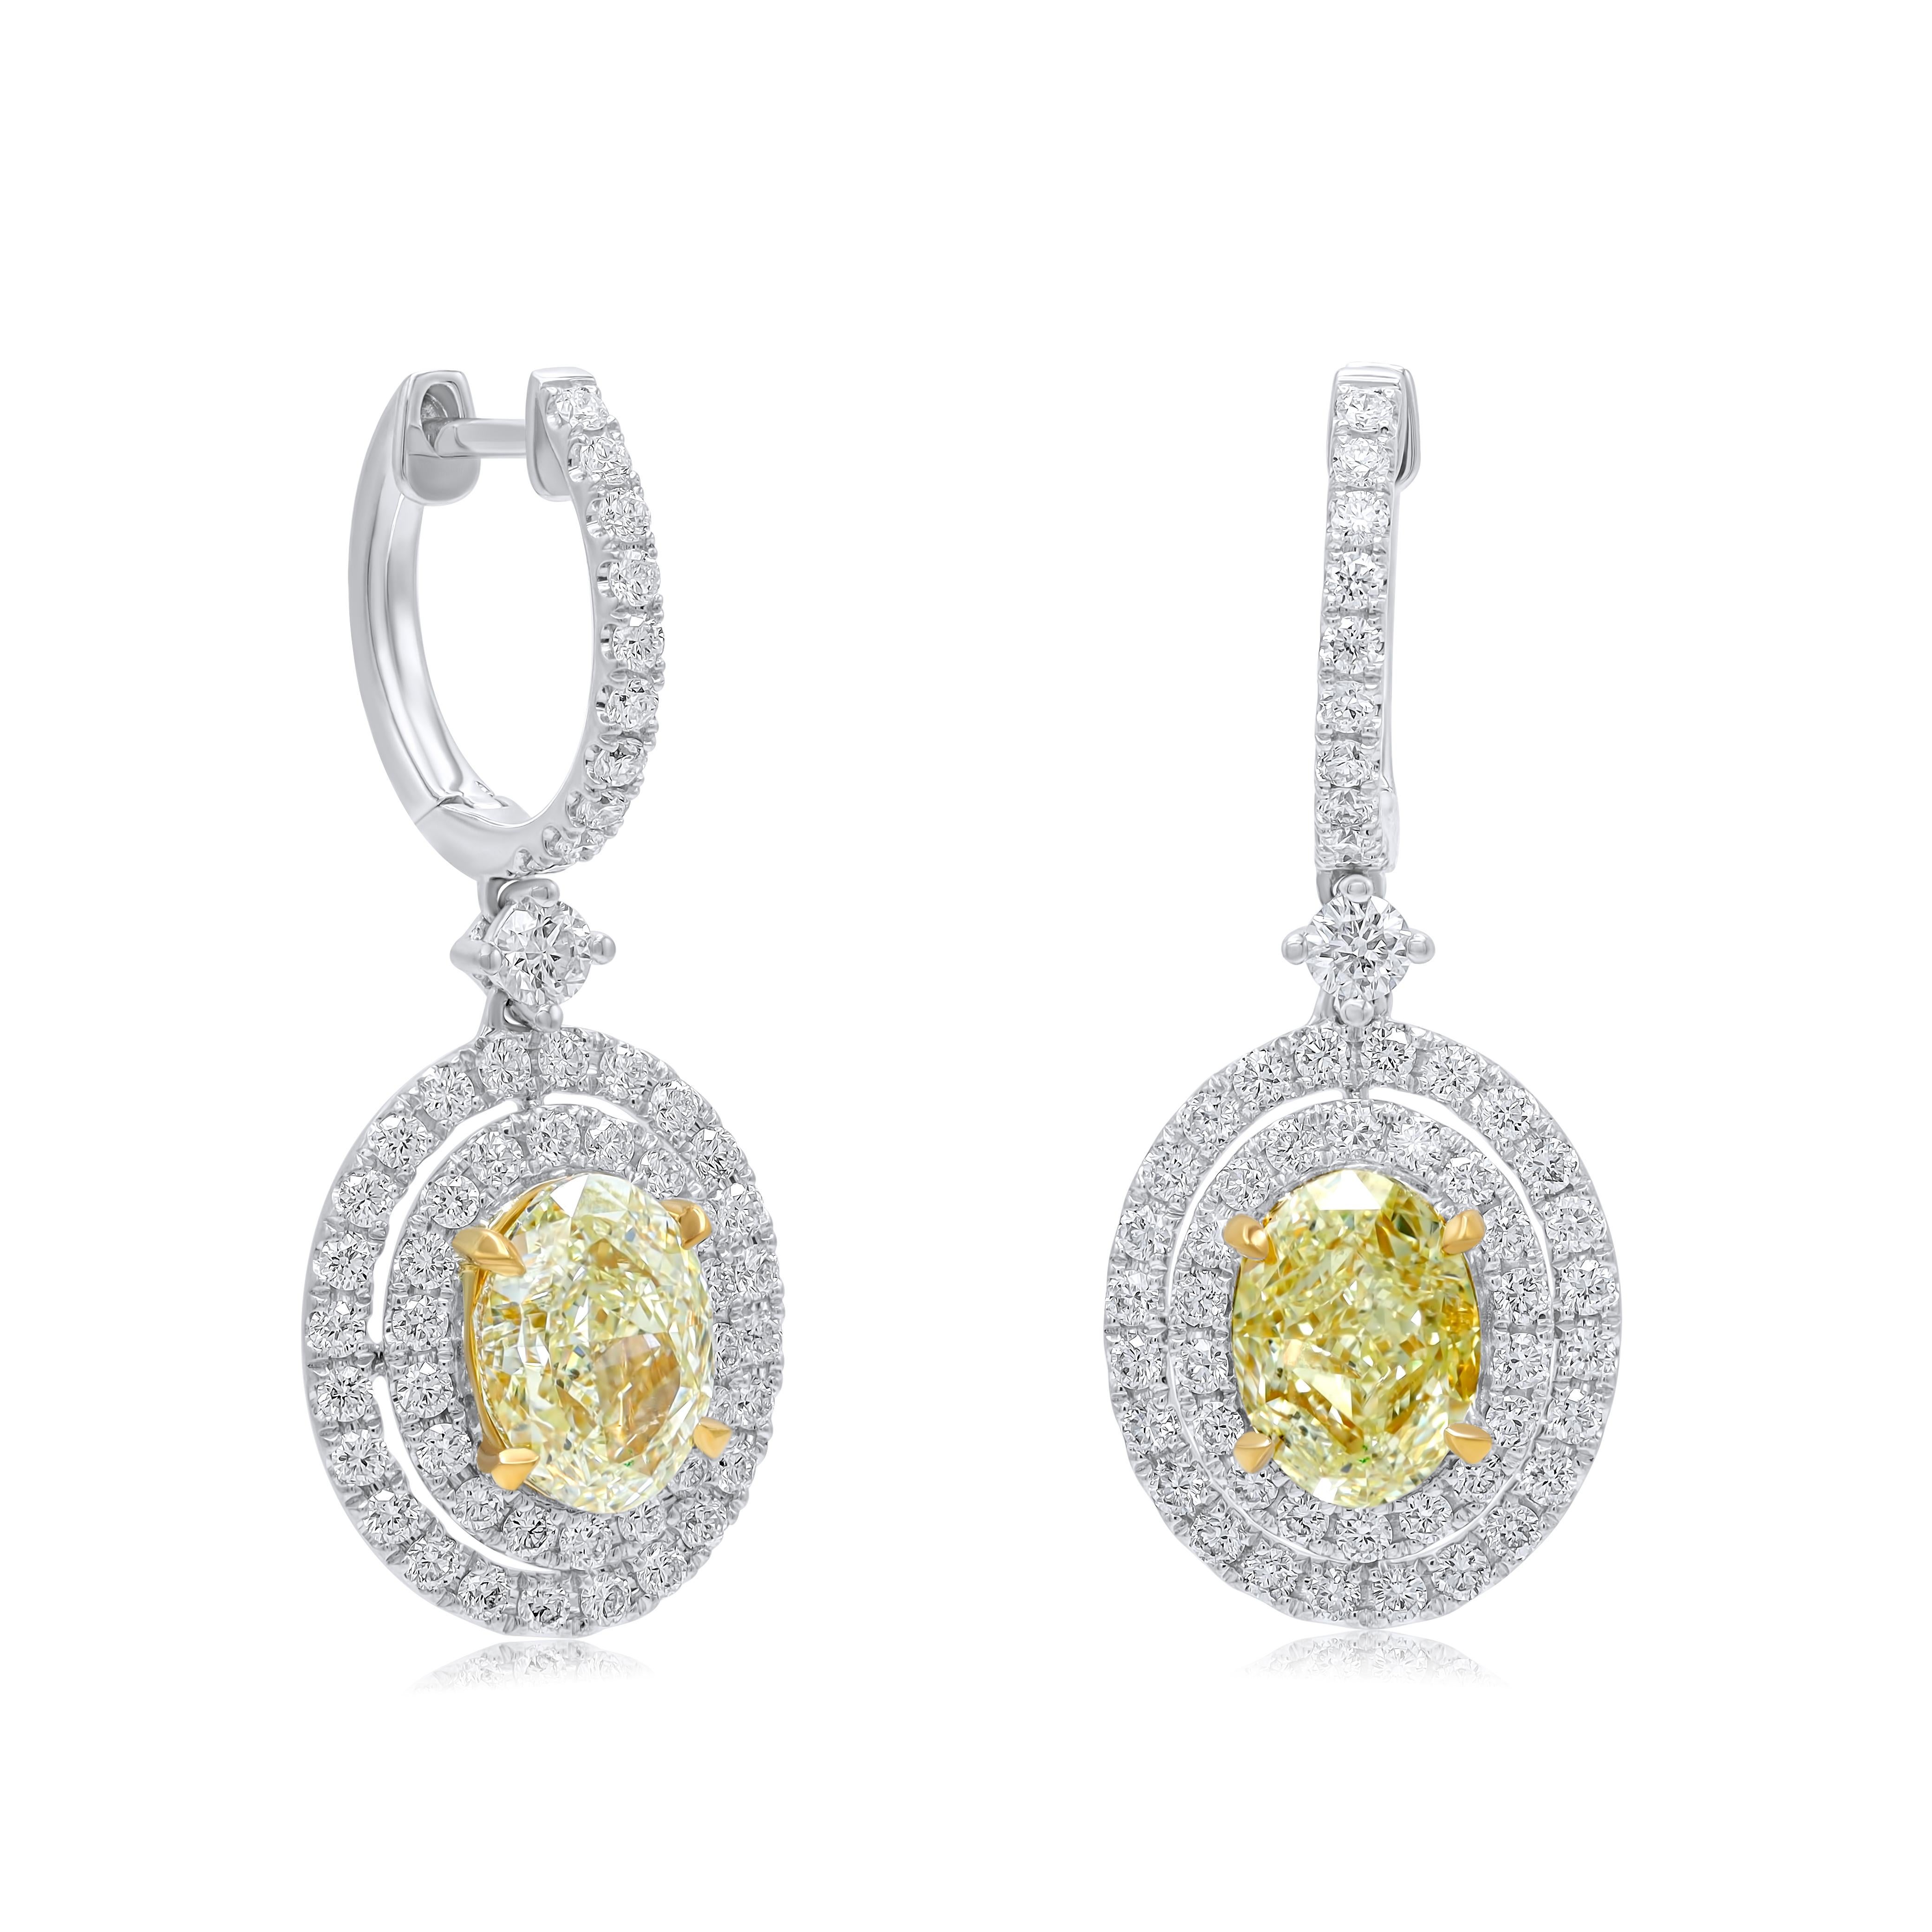 18kt Two Tone Fancy Light Yellow  Diamond Earrings.  These earrings feature 2 GIA certified Fancy light oval shape diamonds 3.00cts total weight  surrounded  with double halo and 1.25cts 